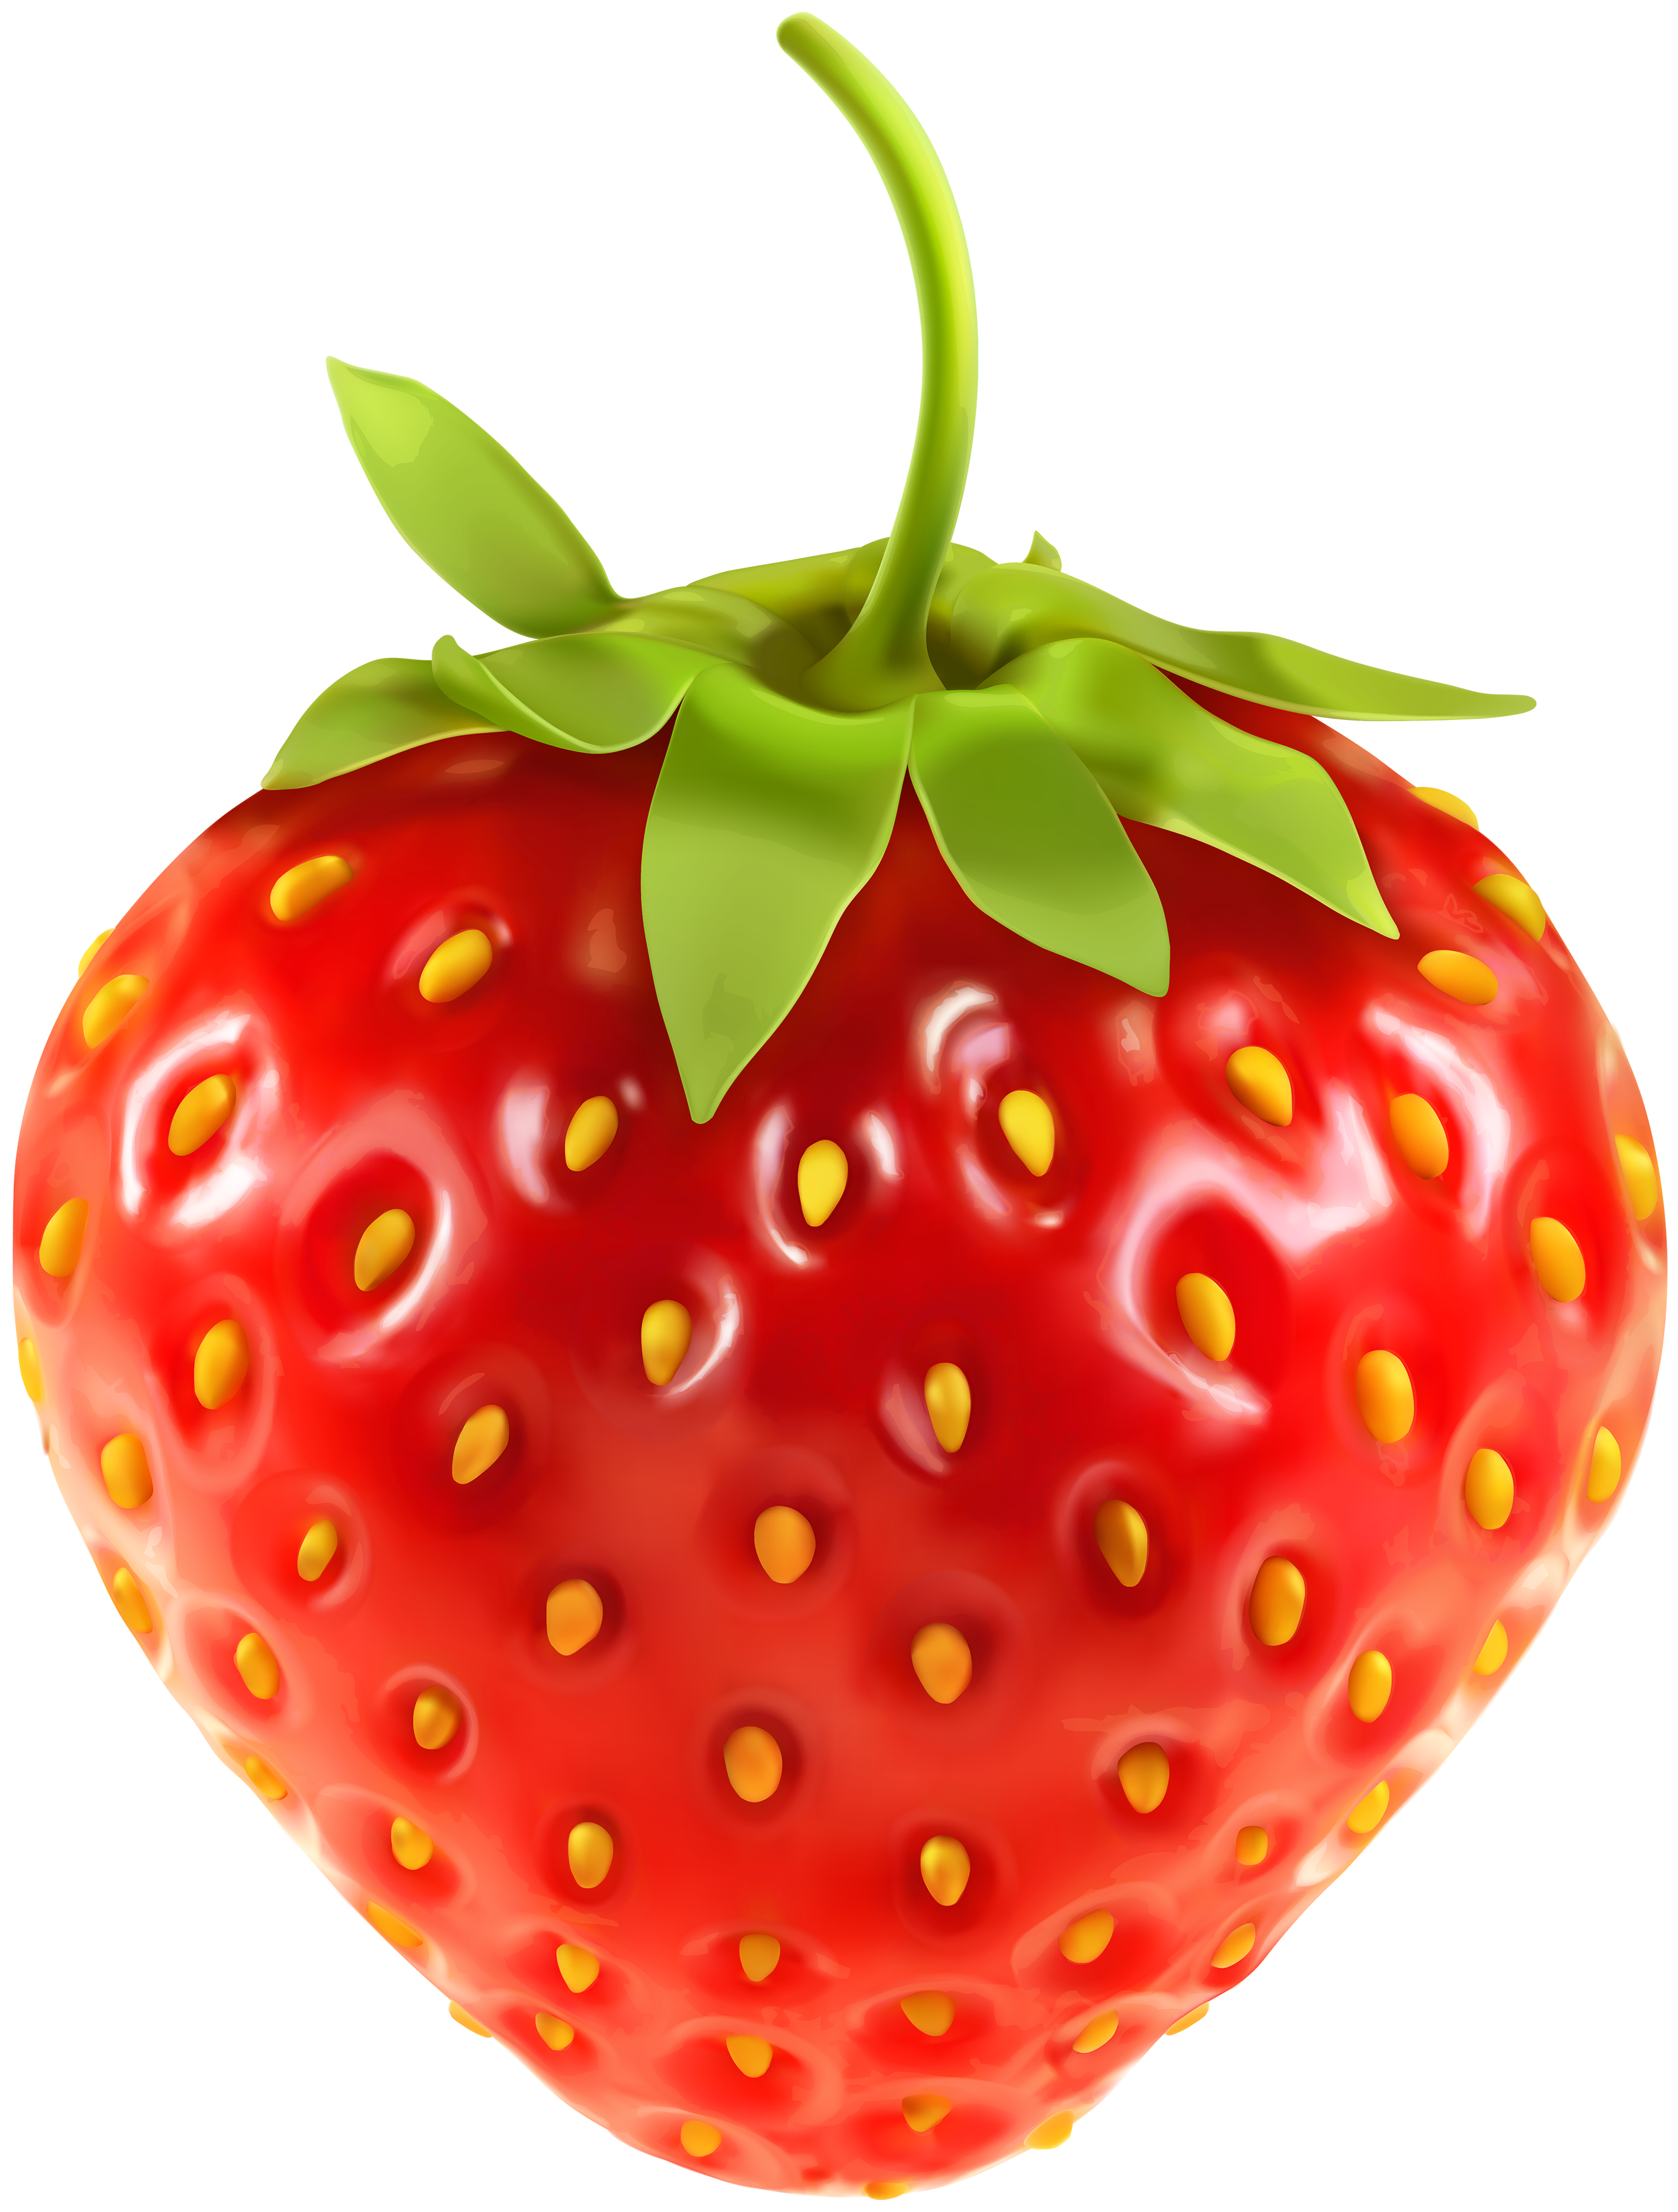 Strawberry clipart strawberry fruit clip art downloadclipart org 2